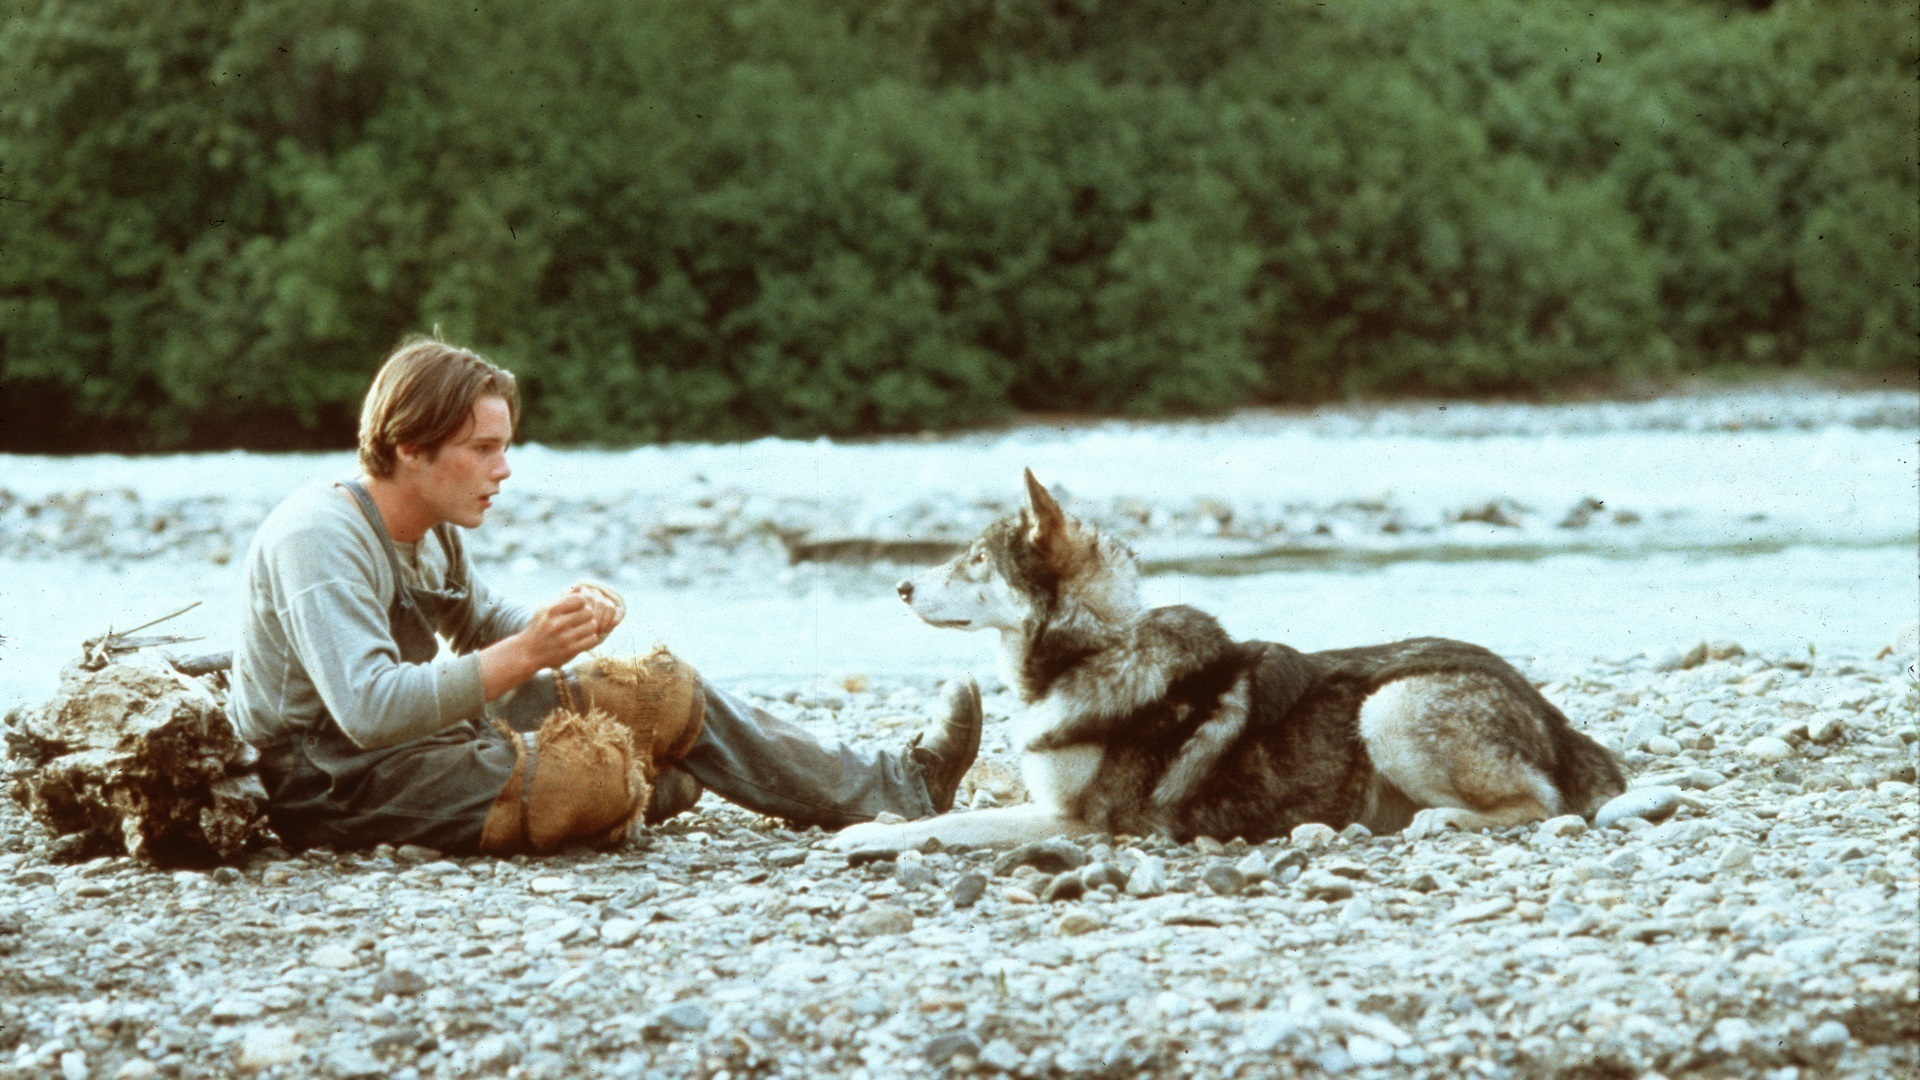 <p>One of numerous film adaptations of the 1906 Jack London adventure novel of the same name, “White Fang” (1991) stars a young Ethan Hawke as Jack Conroy and Jed as the eponymous wolfdog. Jed isn’t a one-trick movie mutt, as he actually made his debut in John Carpenter’s famous fright fest “The Thing” in 1981 and also appeared in 1985's "The Journey of Natty Gann." “White Fang” received generally positive reviews upon its release, earned a respectable $34 million in theaters and inspired a 1994 sequel, “White Fang 2: Myth of the White Wolf.” We’d say the sequel was forgettable, but sadly, we still remember seeing it as kids some 24 years ago.</p><p>You may also like: <a href='https://www.yardbarker.com/entertainment/articles/the_best_movies_of_2023_so_far_091323/s1__39106589'>The best movies of 2023 (so far)</a></p>